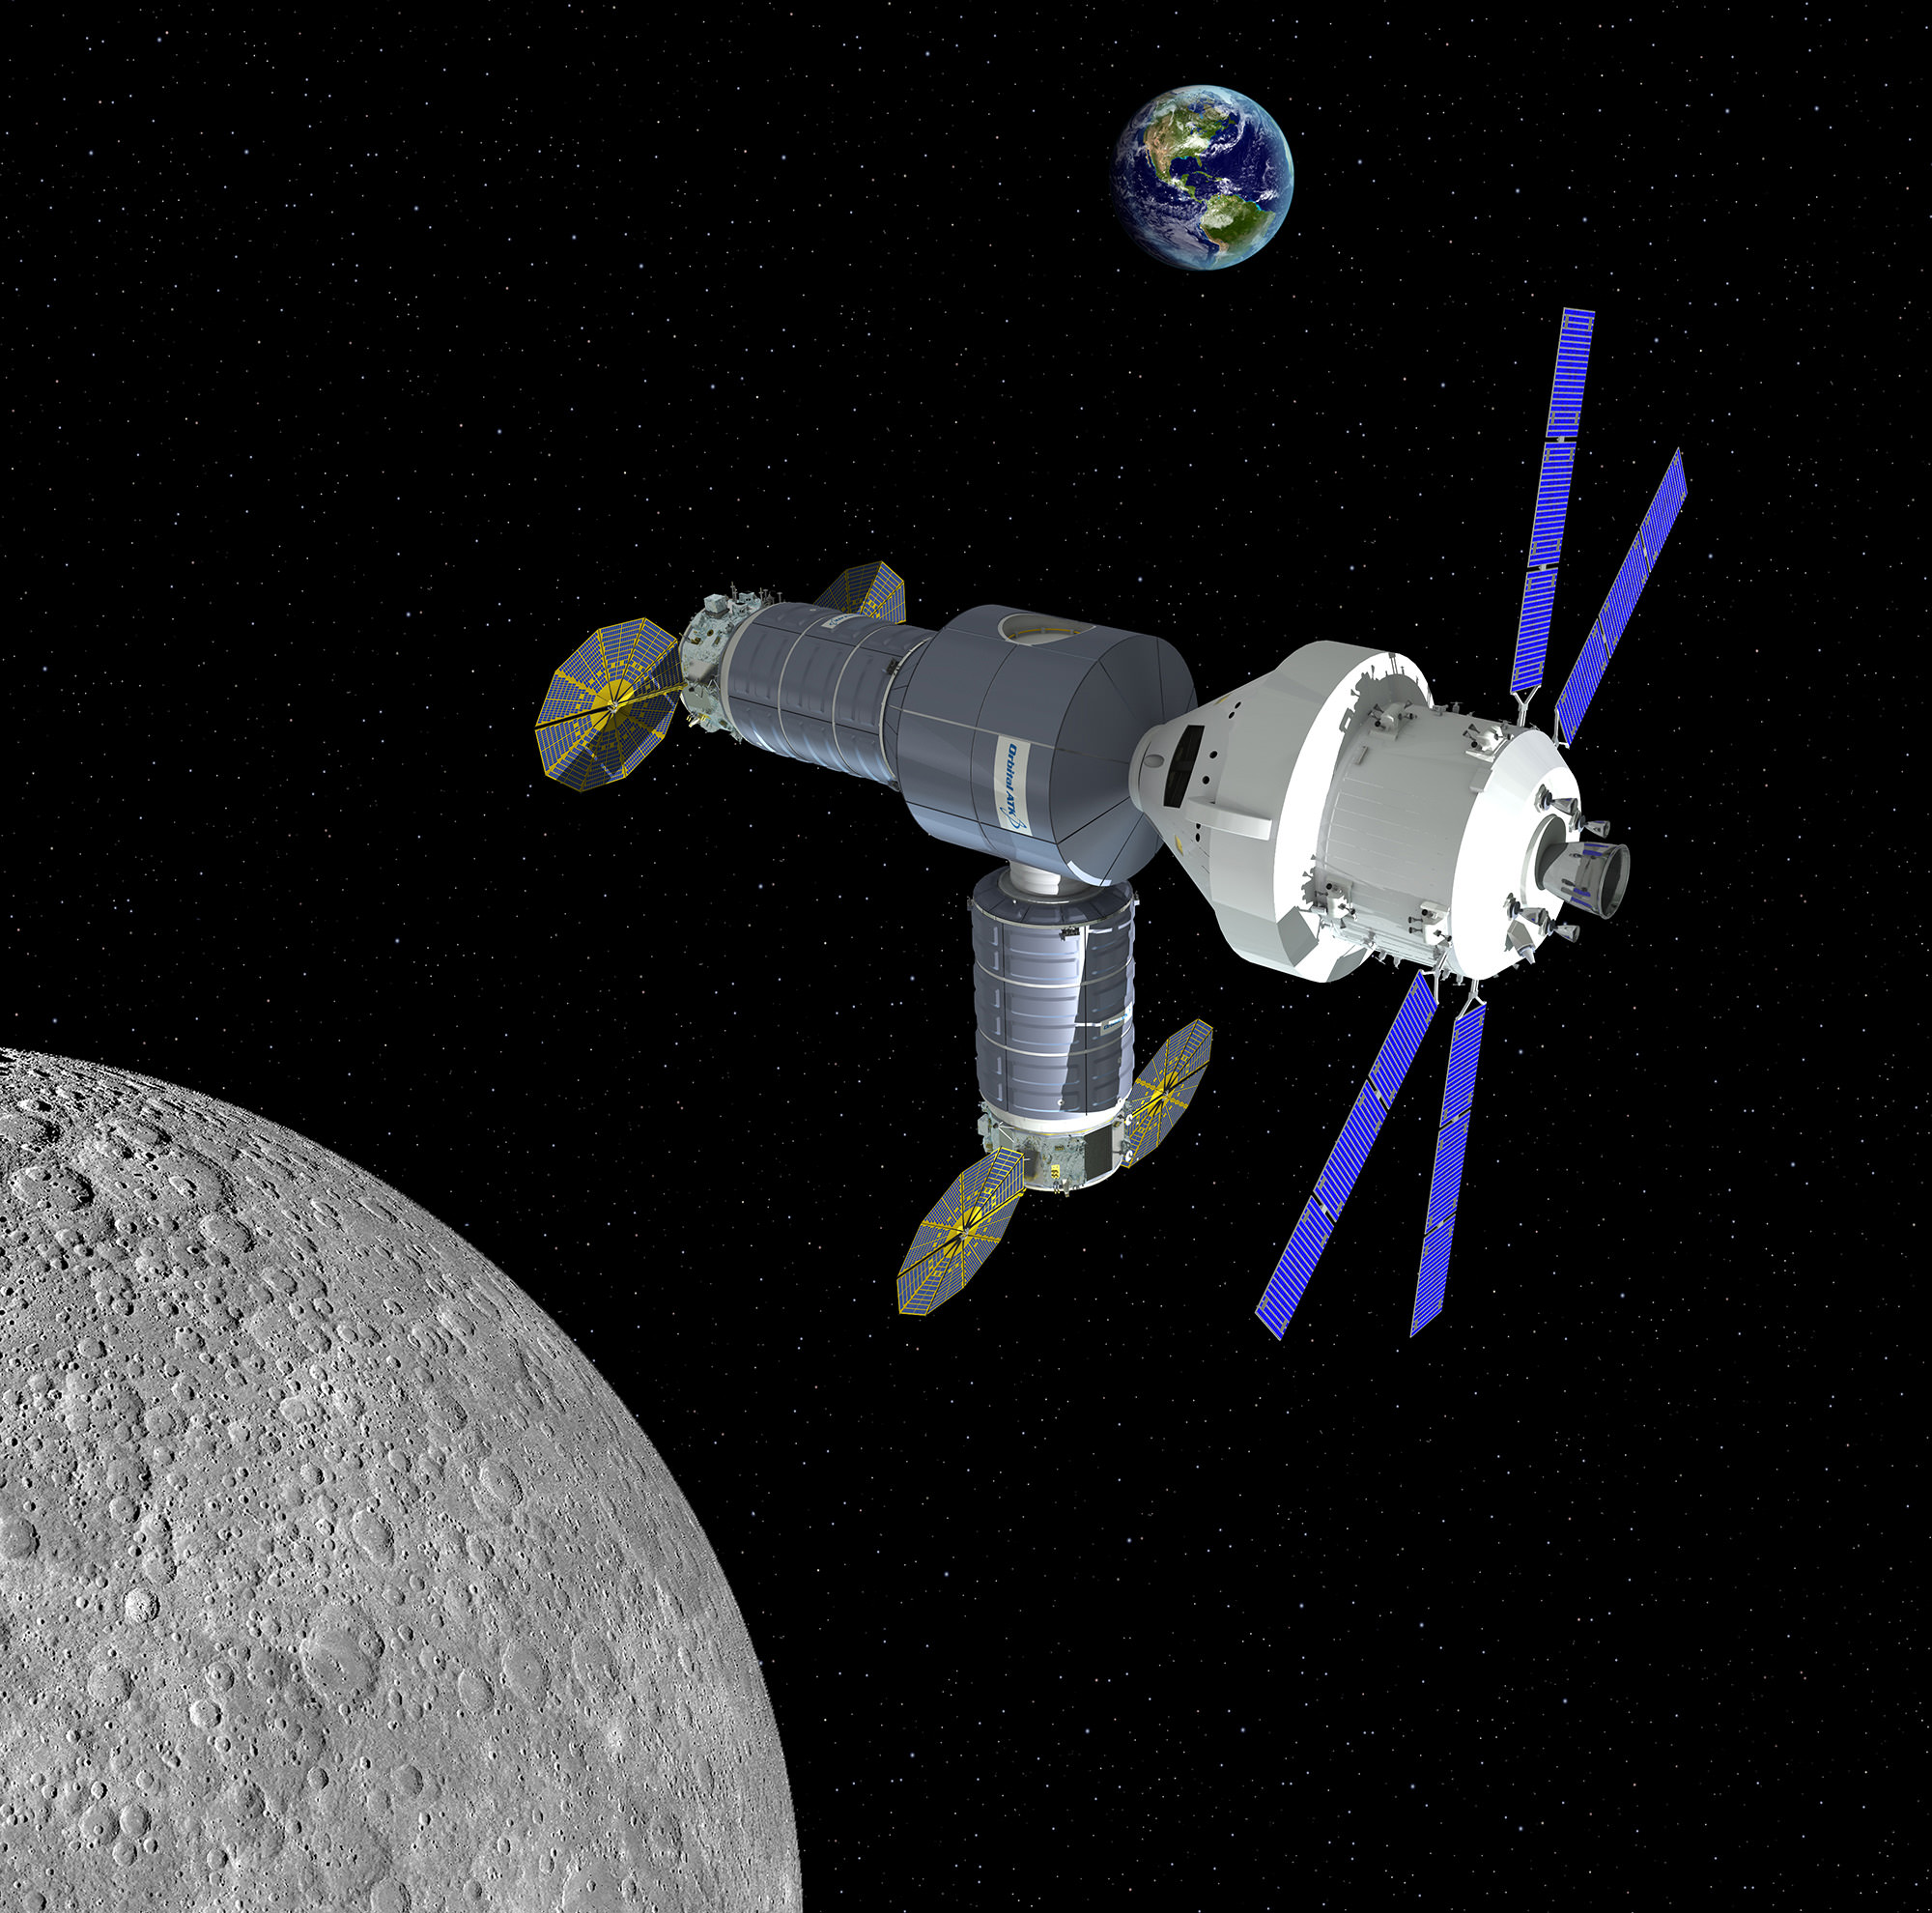 Artist rendering of Orbital ATK concept for an initial lunar habitat outpost, as it would appear with NASA’s Orion spacecraft in 2021. Credit: Orbital ATK 